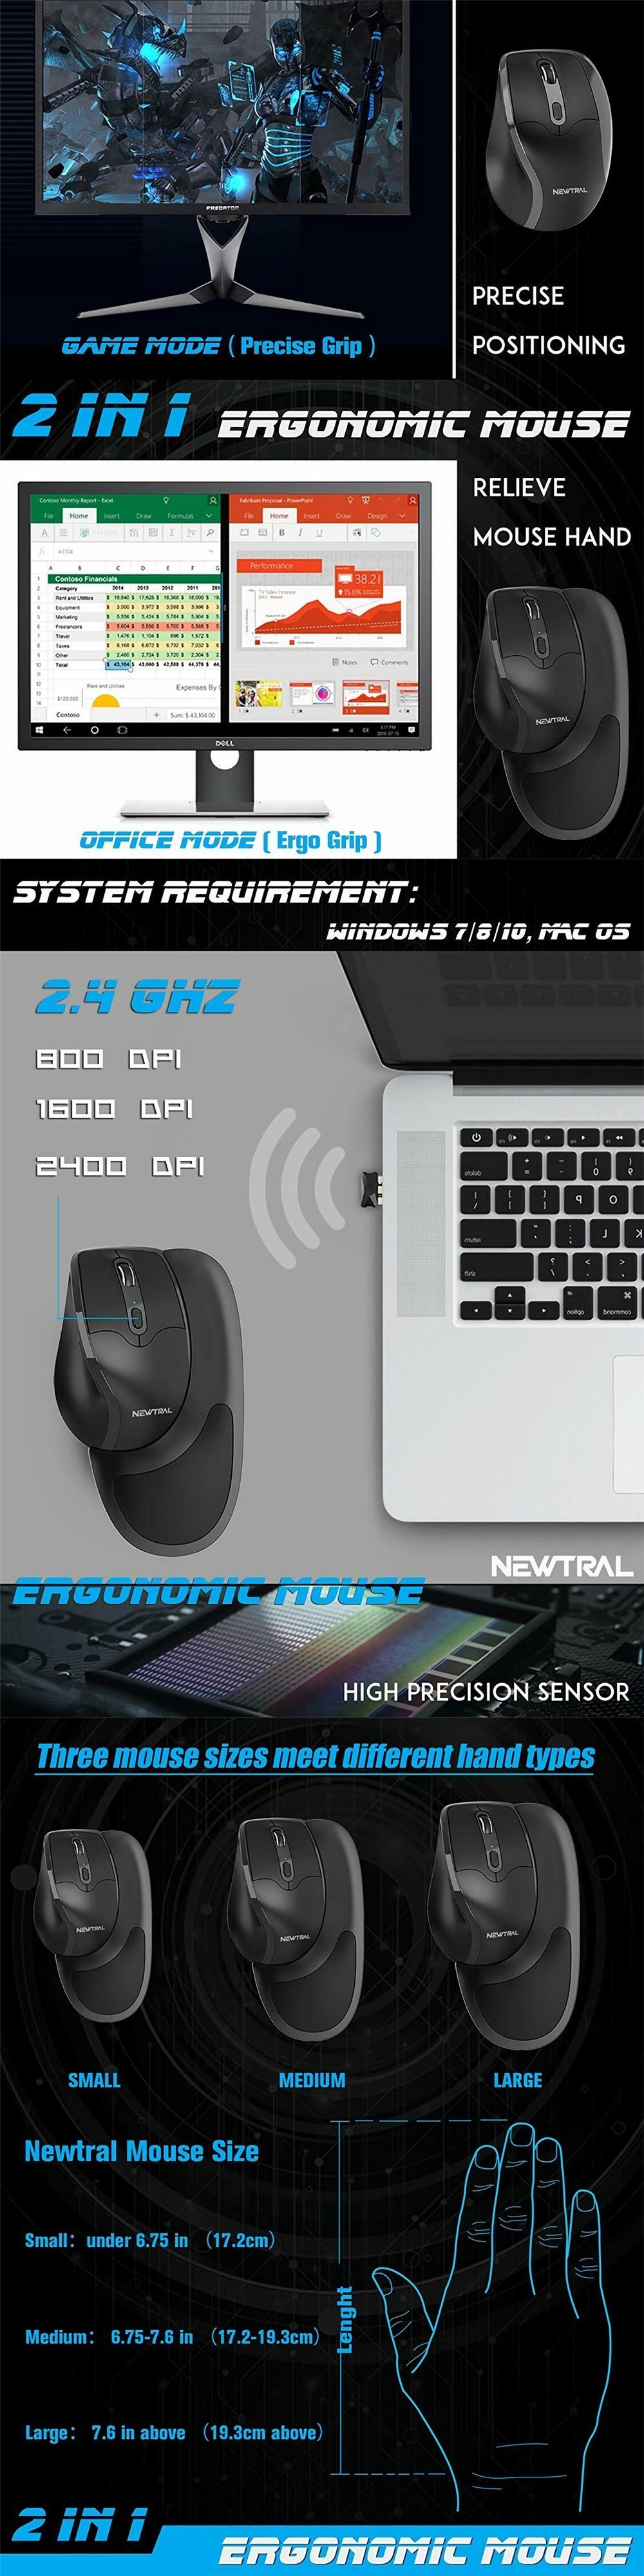 Newtral-N300-24GHz-Wireless-Mouse-2400DPI-Large-Size-Ergonomic-Gaming-Mouse-Home-Office-Mouce-for-Wi-1673228